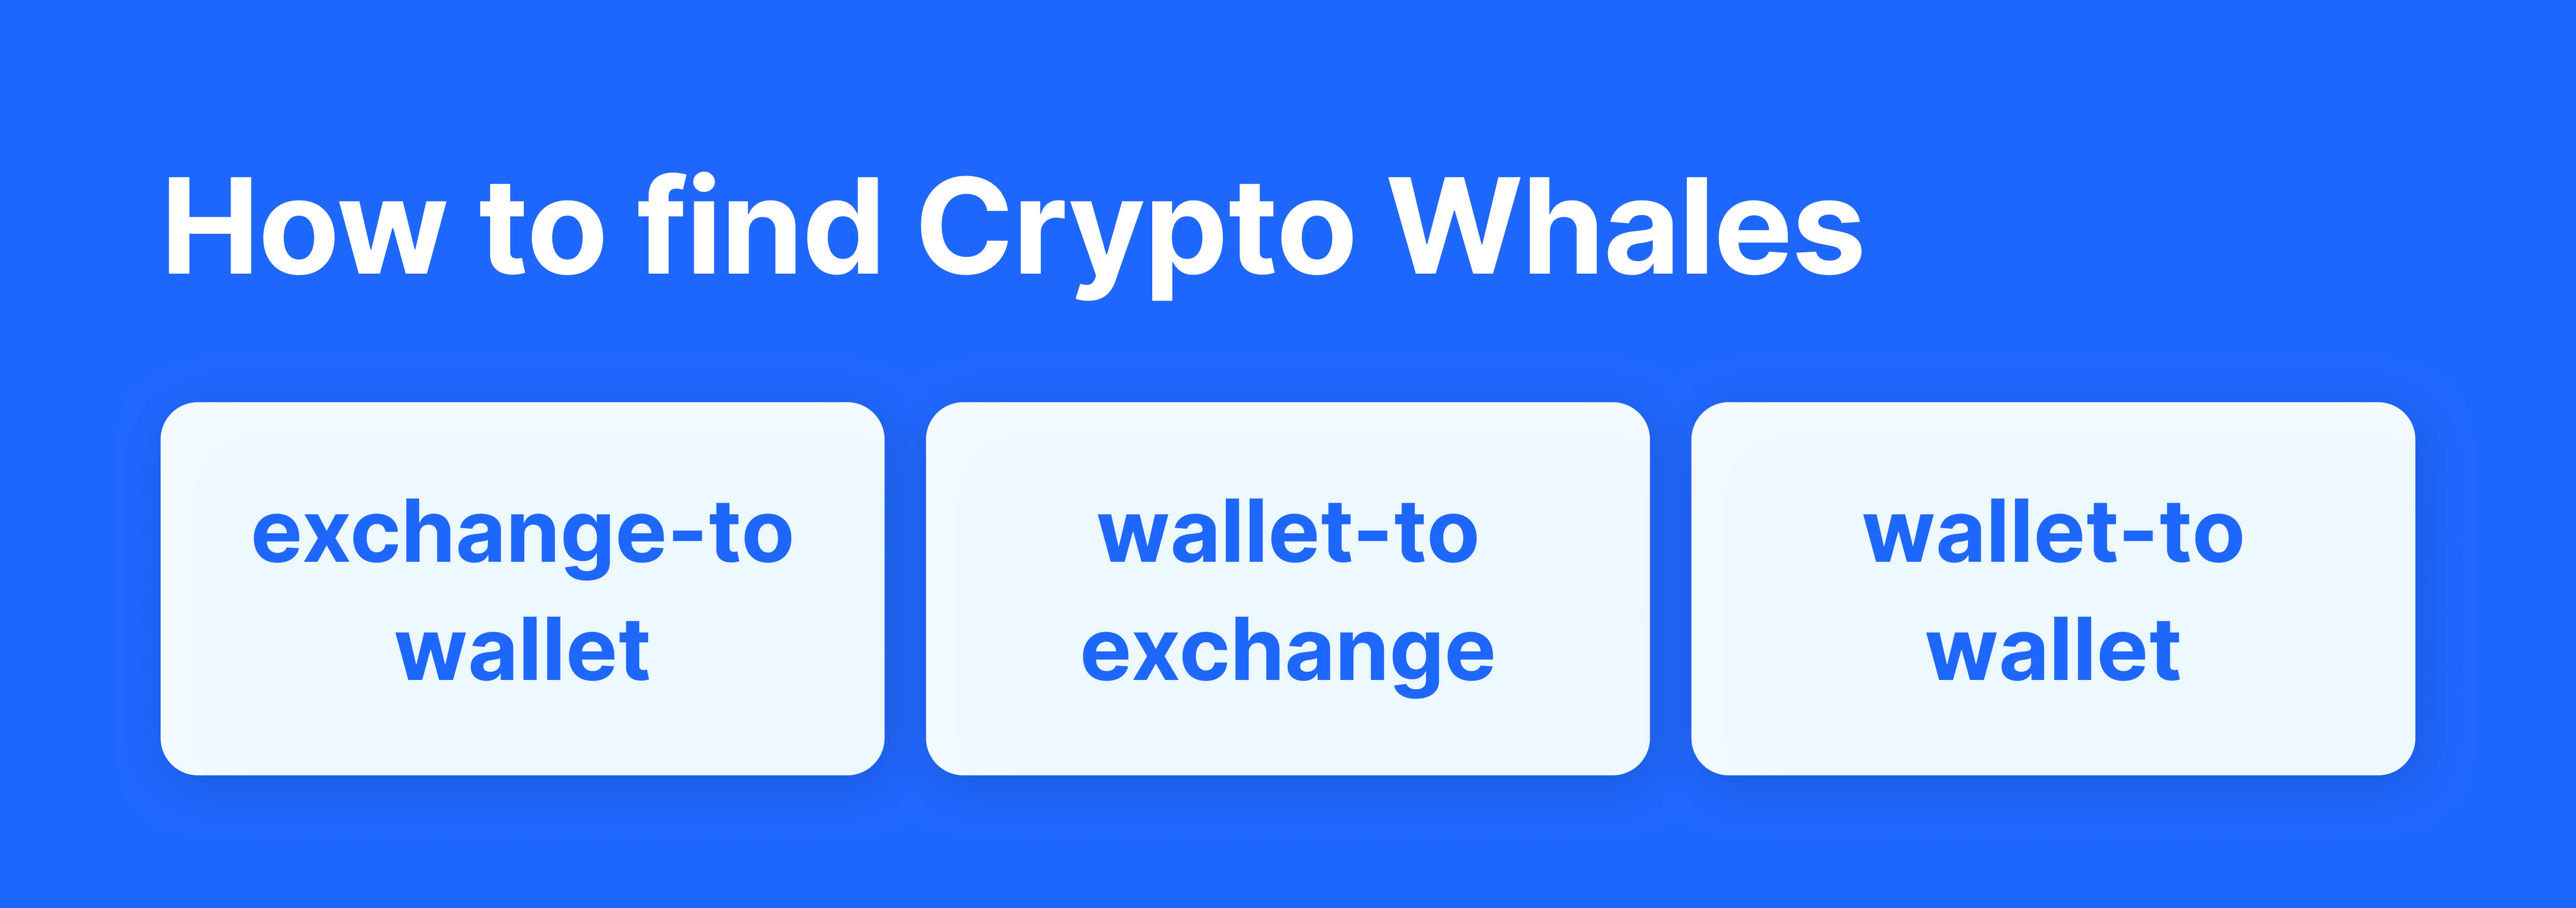 How to find Crypto Whales